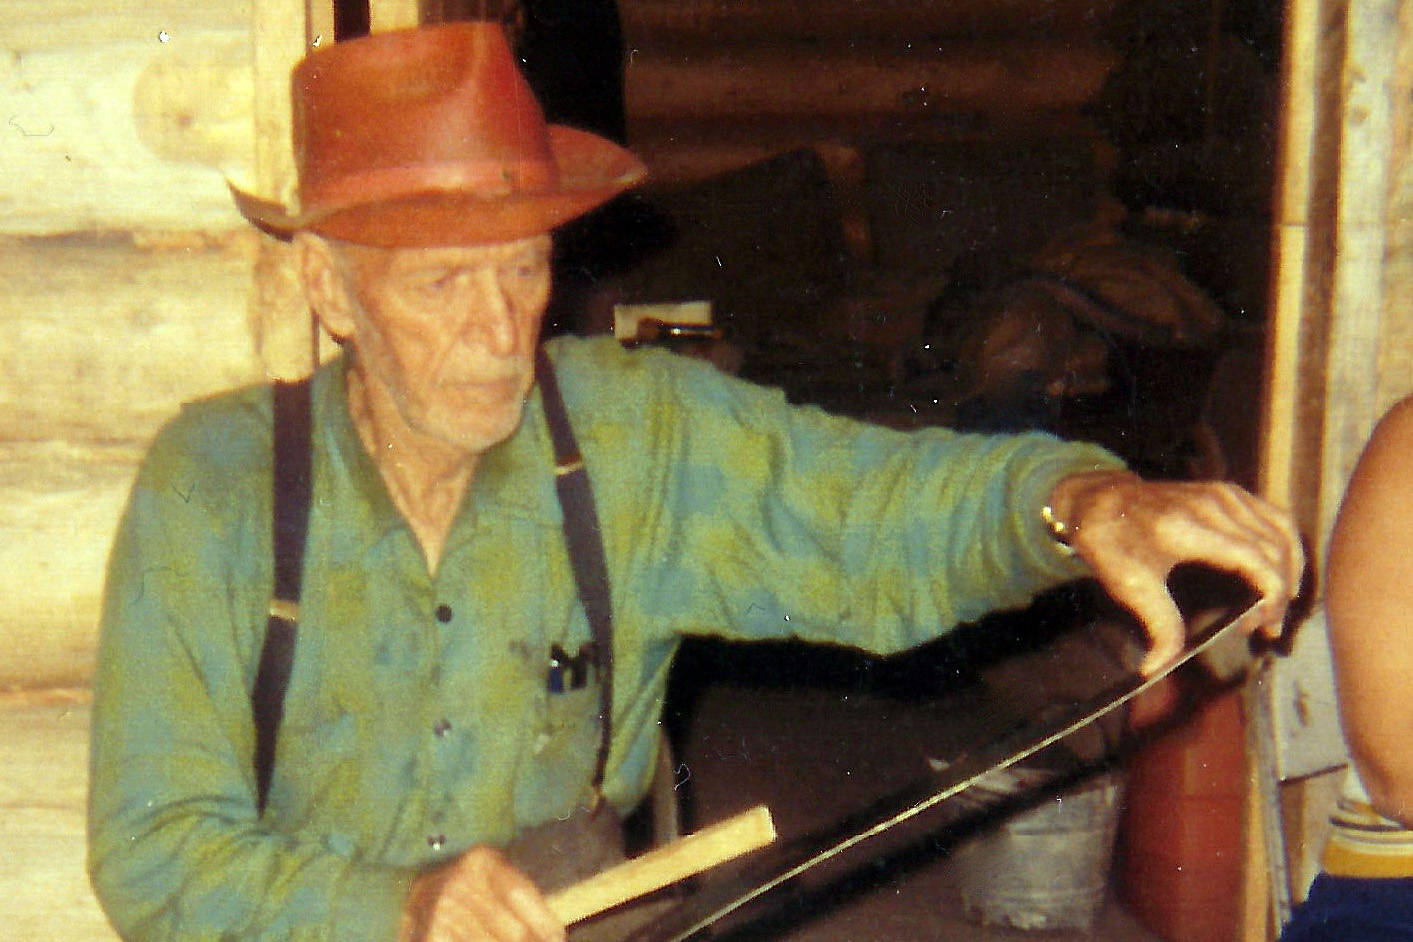 Ed Haun entertains tourists w saw—In this 1972 photo, 87-year-old Ed Haun entertains tourists on his porch with musical abilities on a handsaw. (Courtesy of the Hope and Sunrise Historical Society)